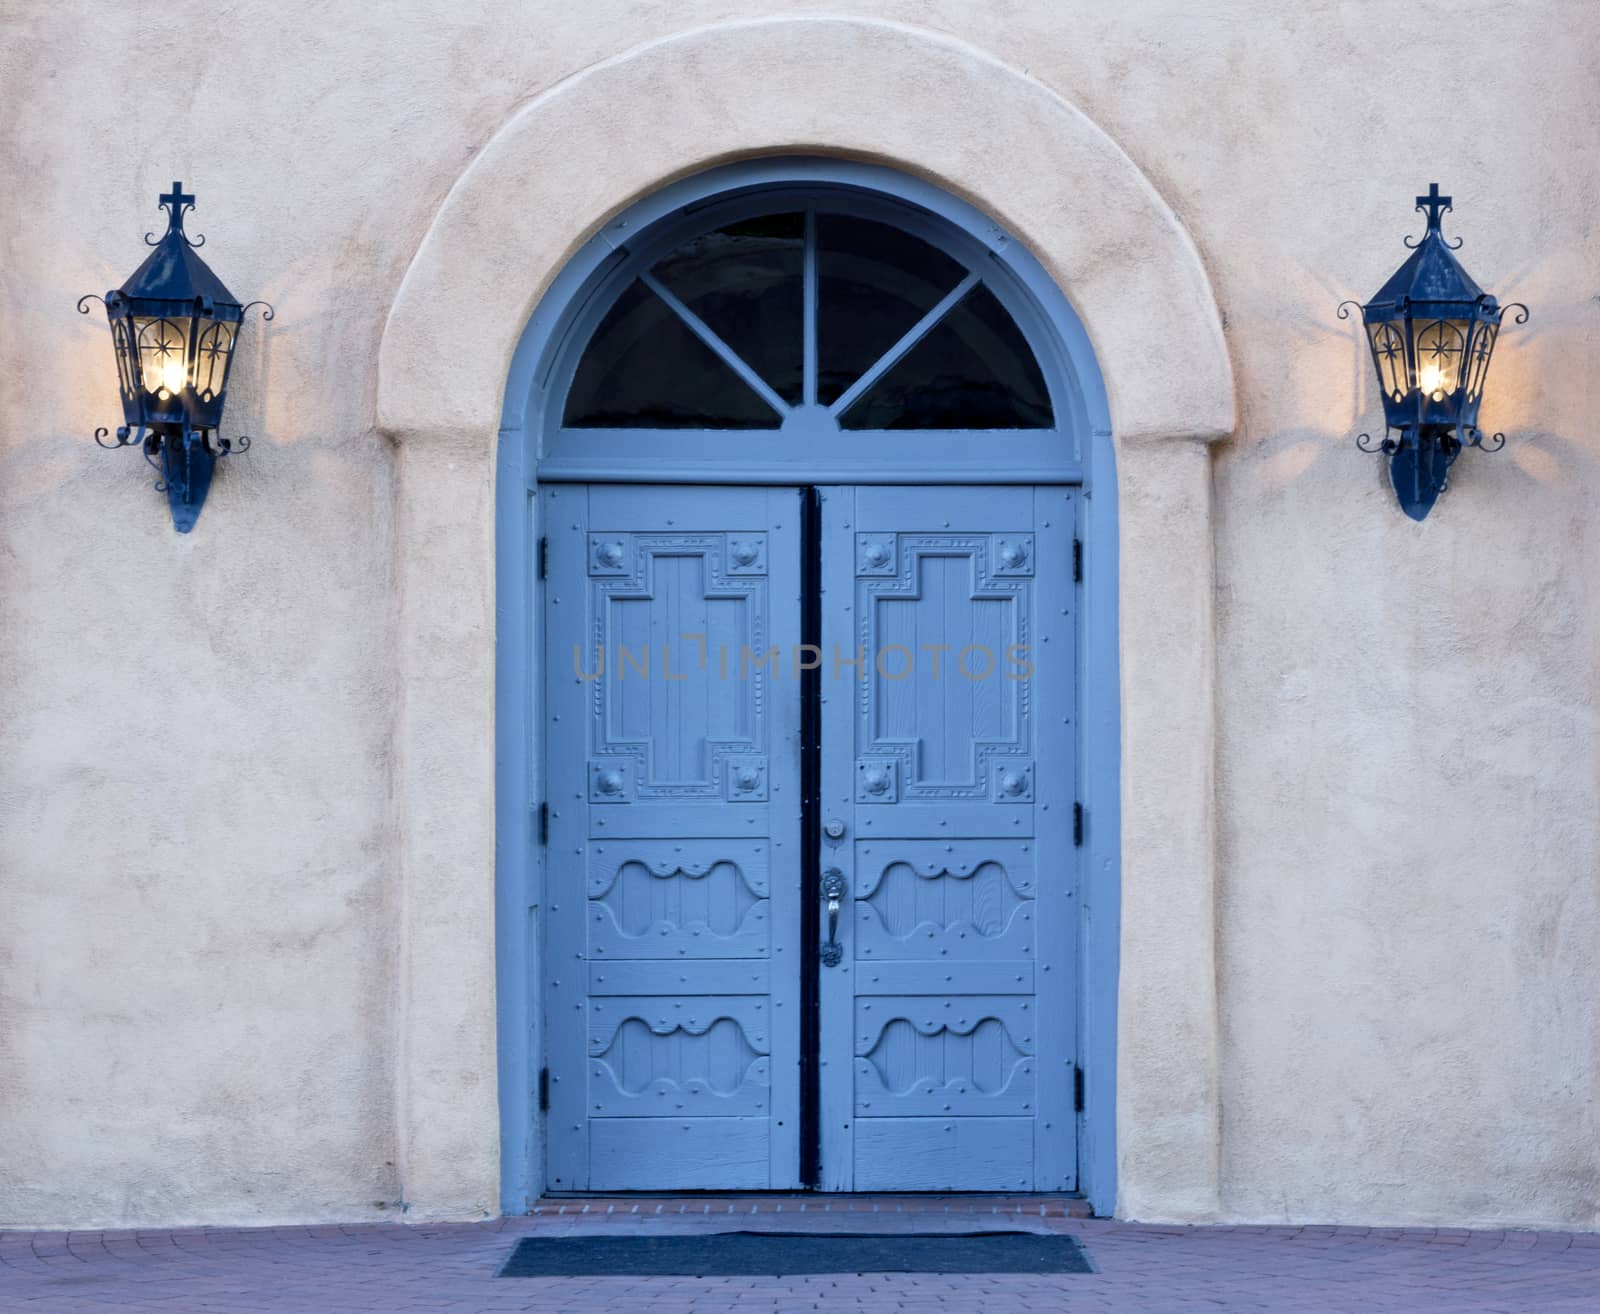 Morning rays begin to illuminate the azure blue, double doors of San Felipe de Neri church in Old Town, Albuquerque, New Mexico. Iron lanterns still glow on adobe wall. This historic church building is listed on National Register of Historic Places.  Preservation of Pueblo Spanish style architecture accents America’s Southwest and is a picturesque tourist attraction. Date is July 4, 2015.